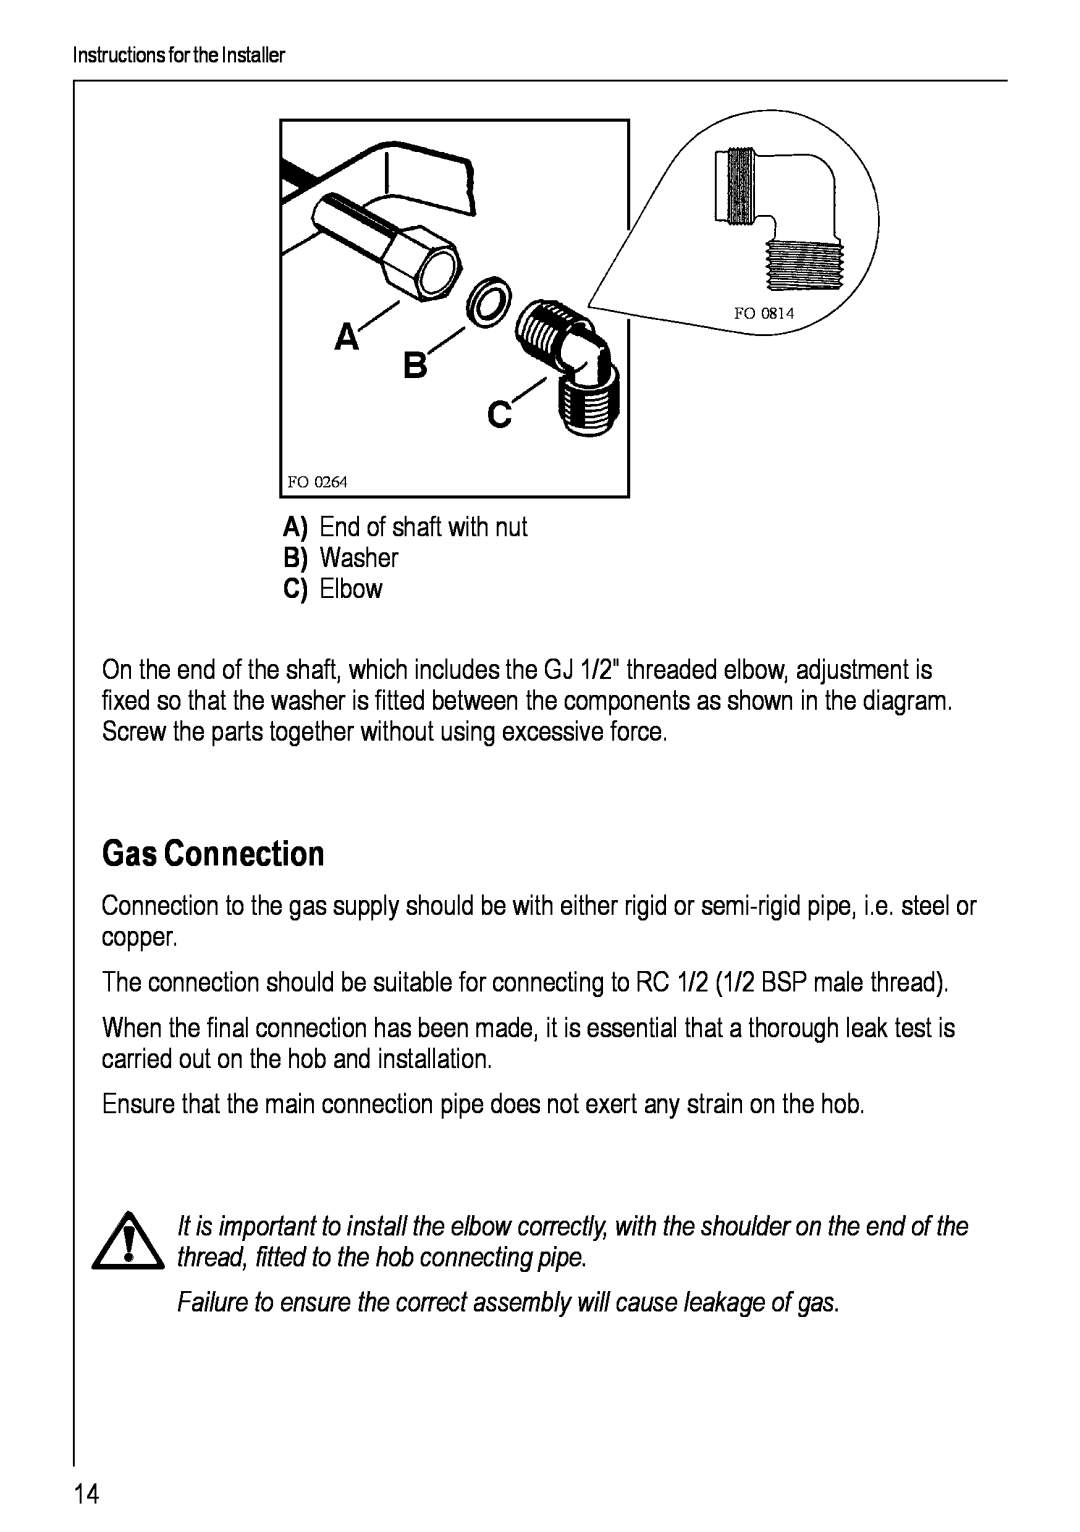 Electrolux 69802 G manual Gas Connection, Failure to ensure the correct assembly will cause leakage of gas 